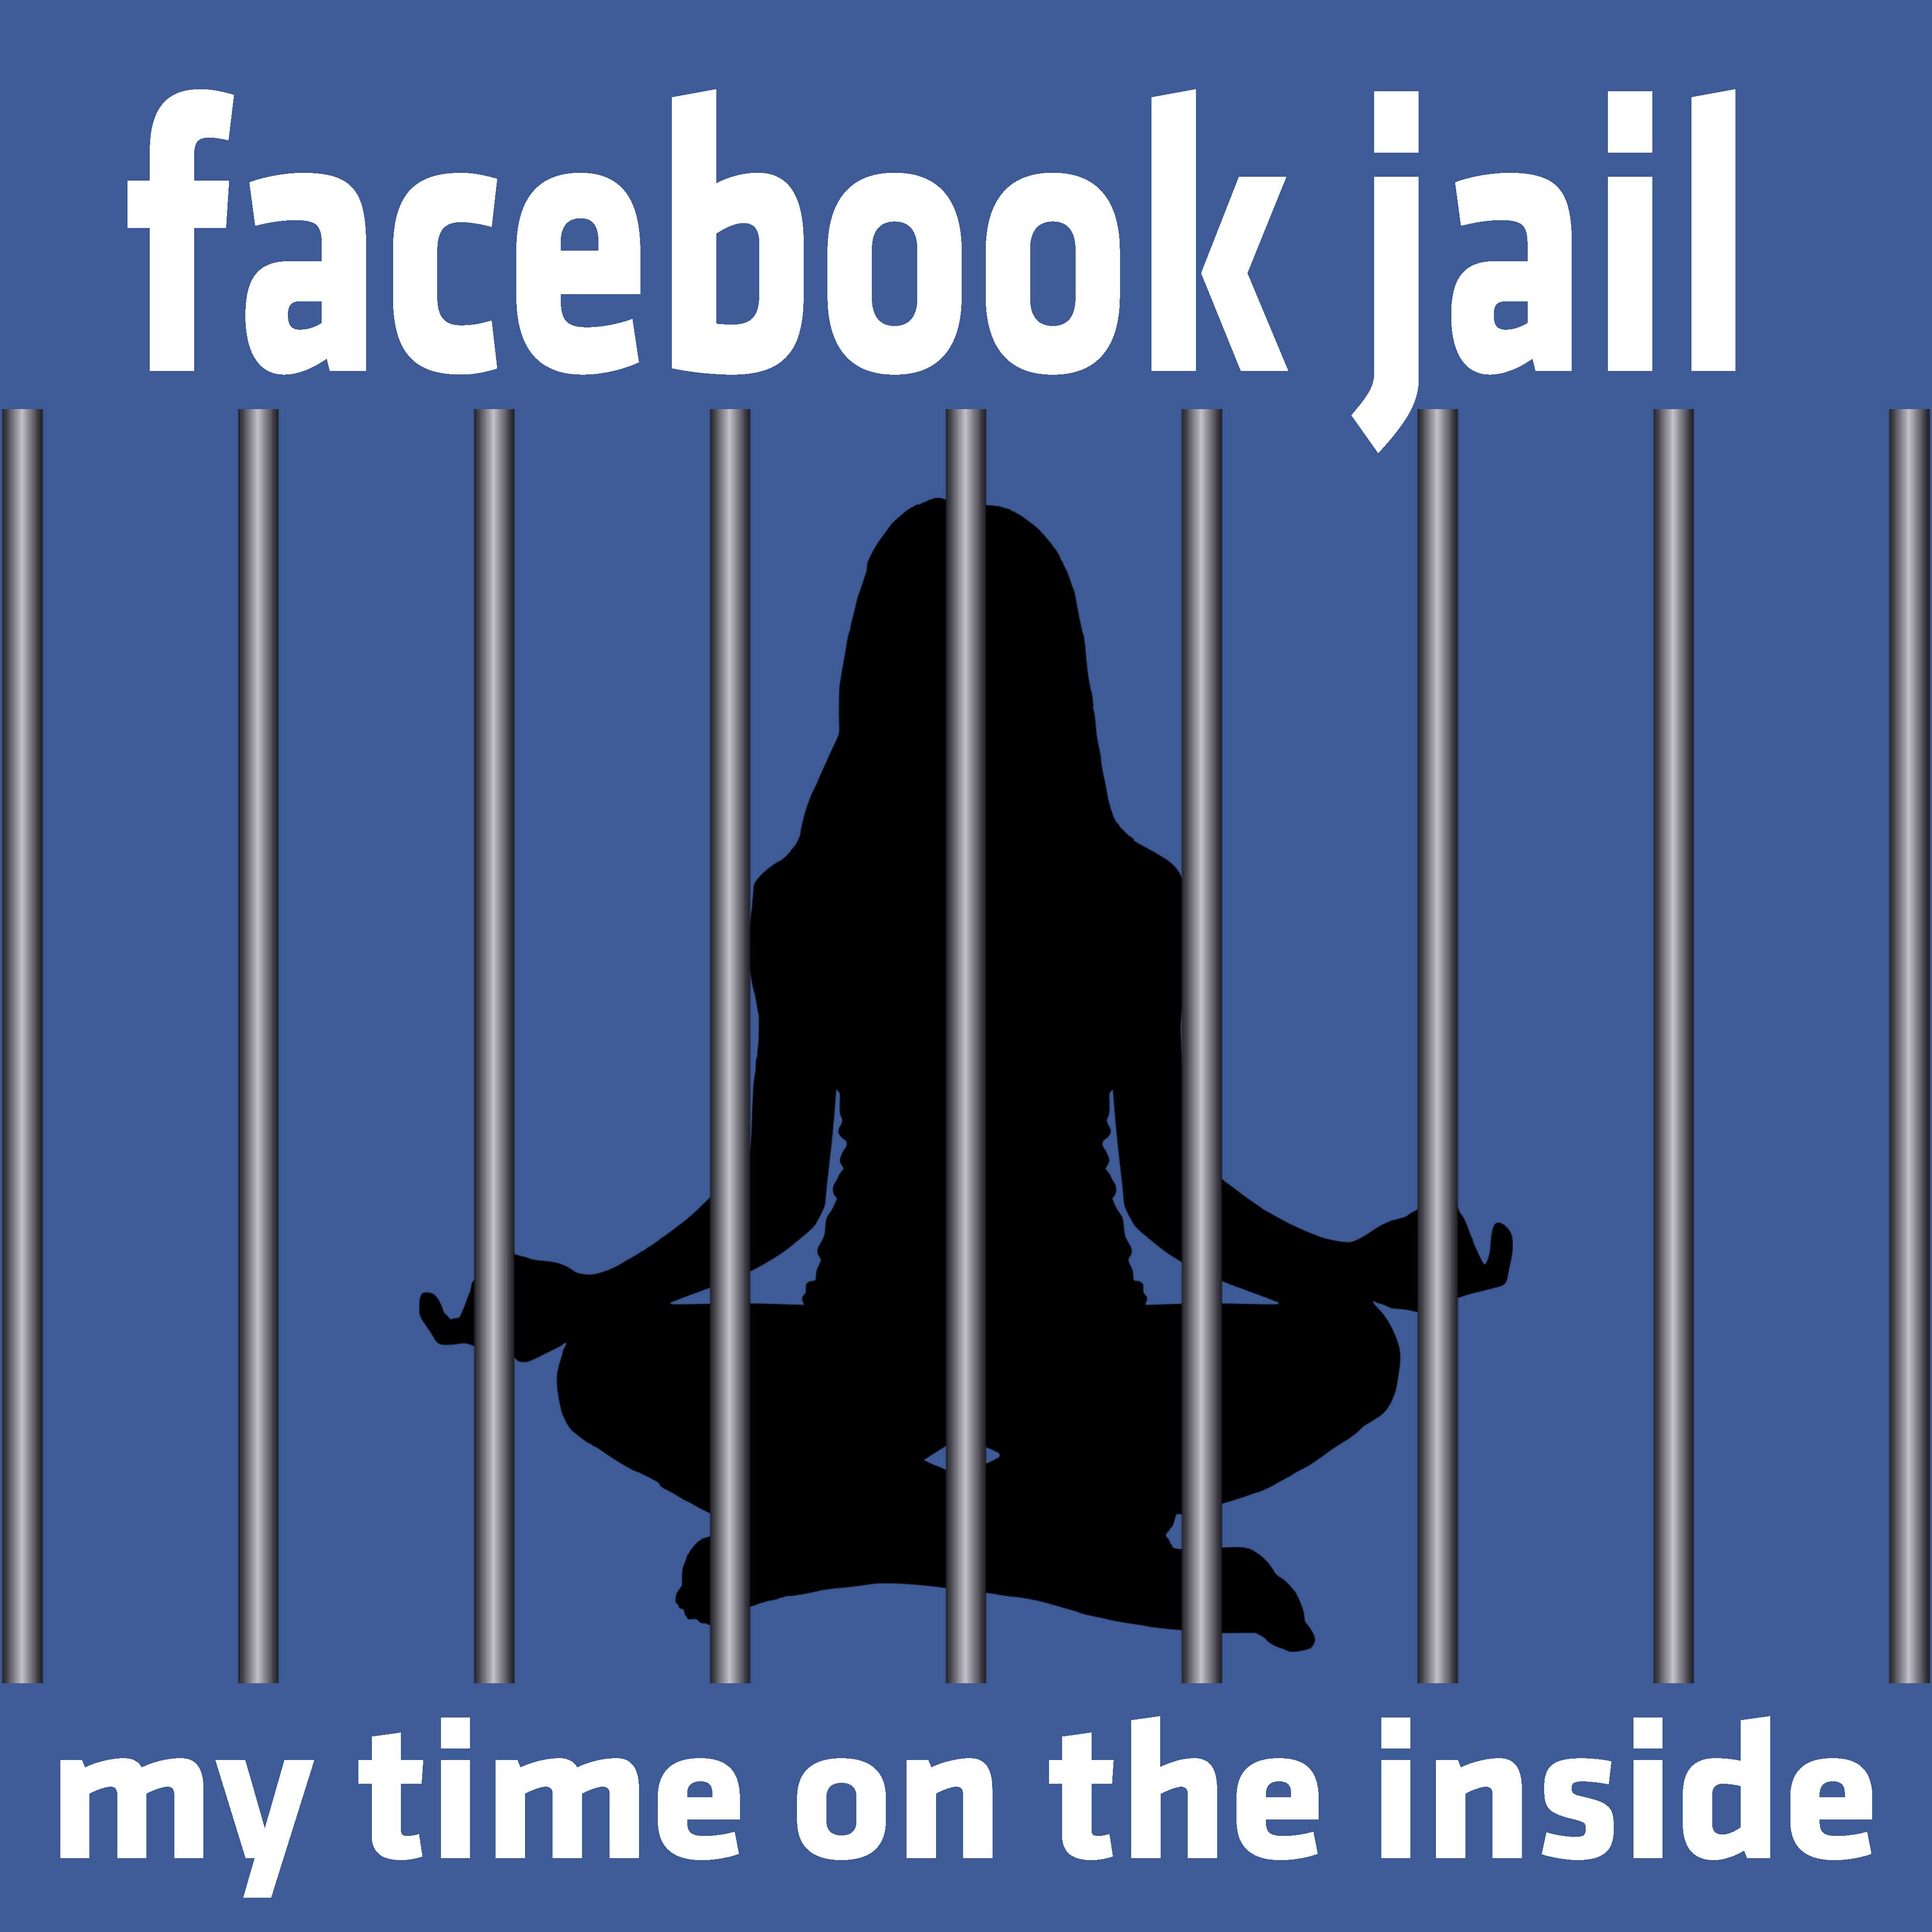 How To Stay Out of Facebook Jail